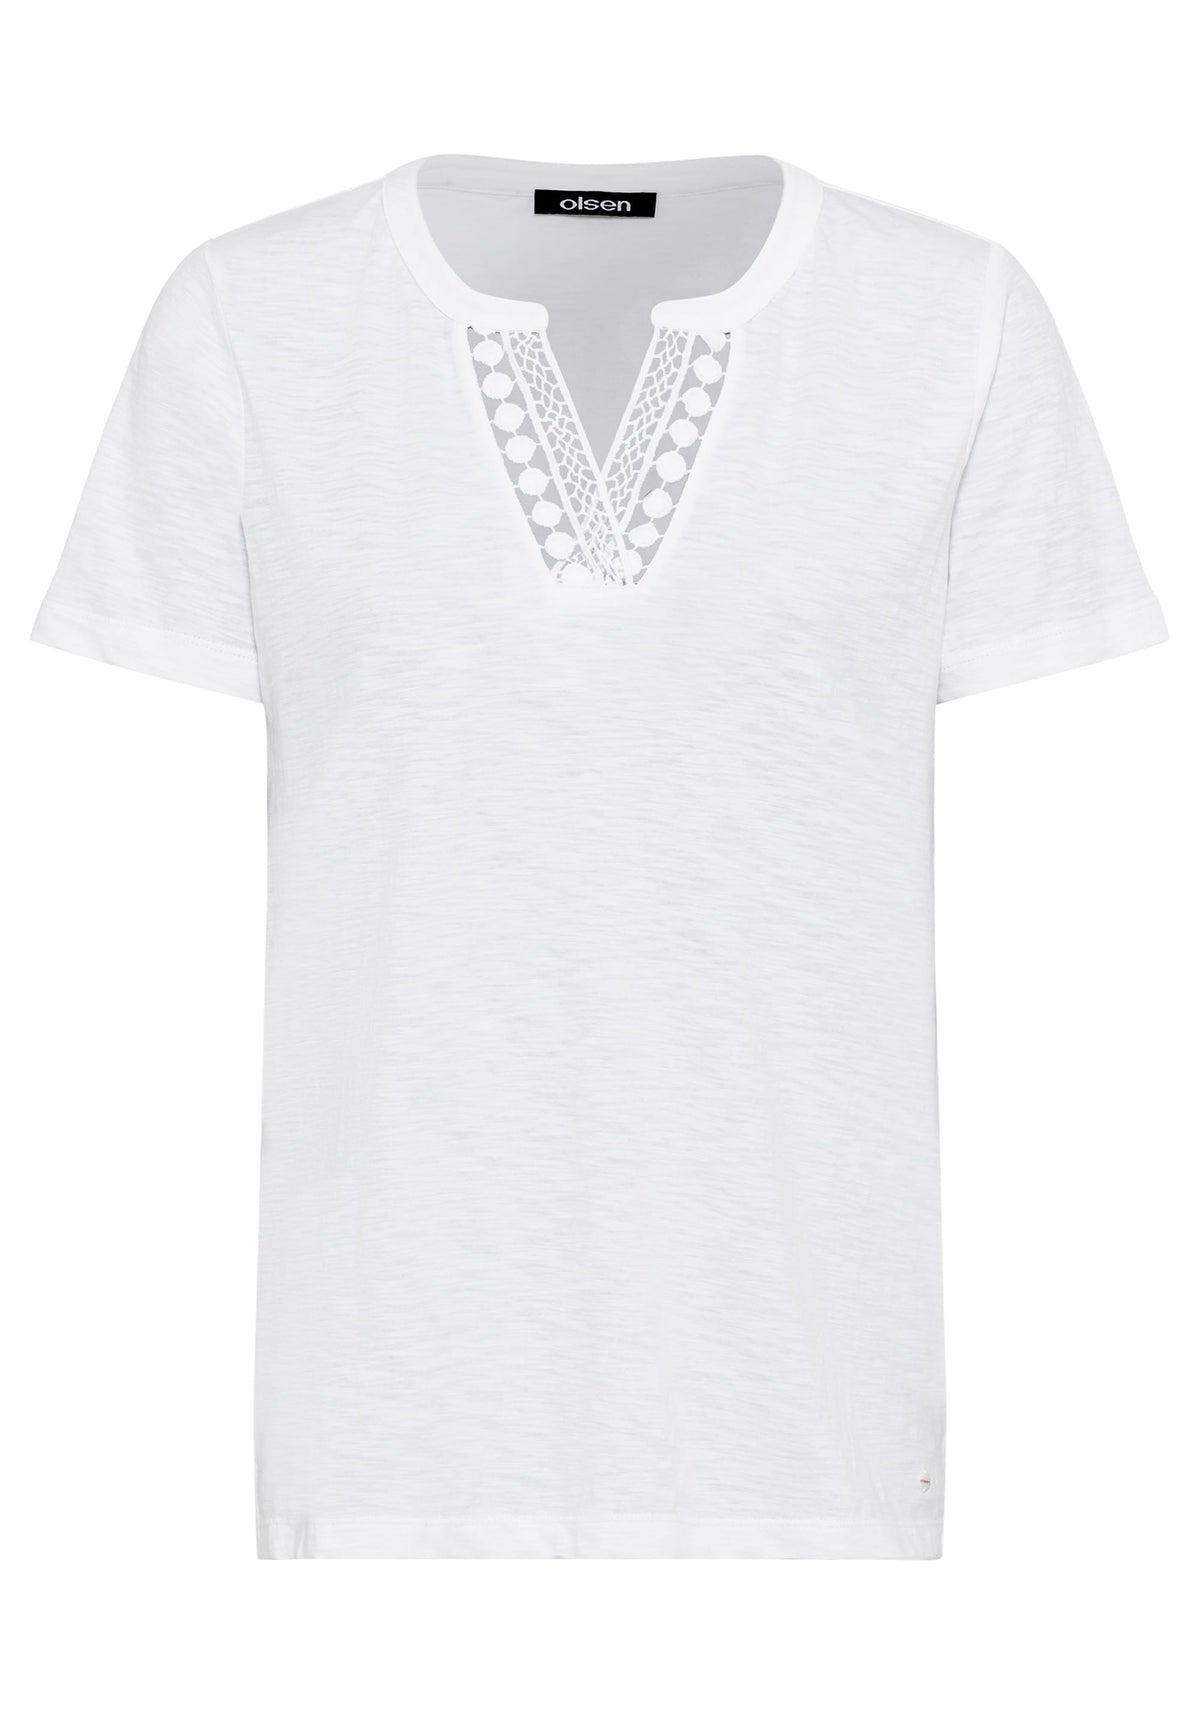 100% Cotton Short Sleeve Split Neck T-Shirt with Embroidered Trim